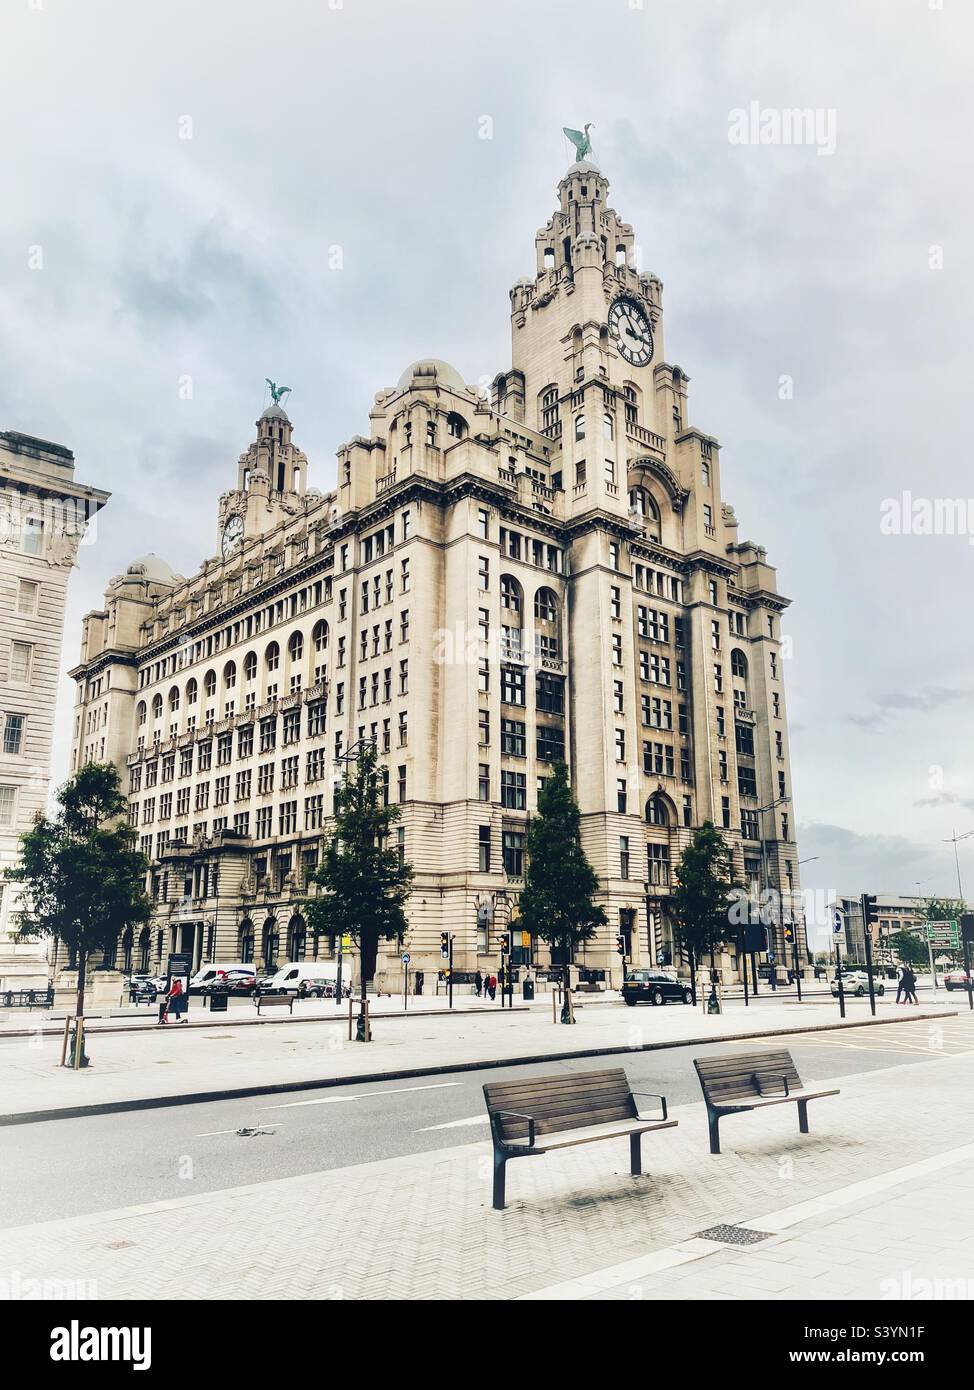 Royal Liver Building, Liverpool, with two empty benches/seats Stock Photo